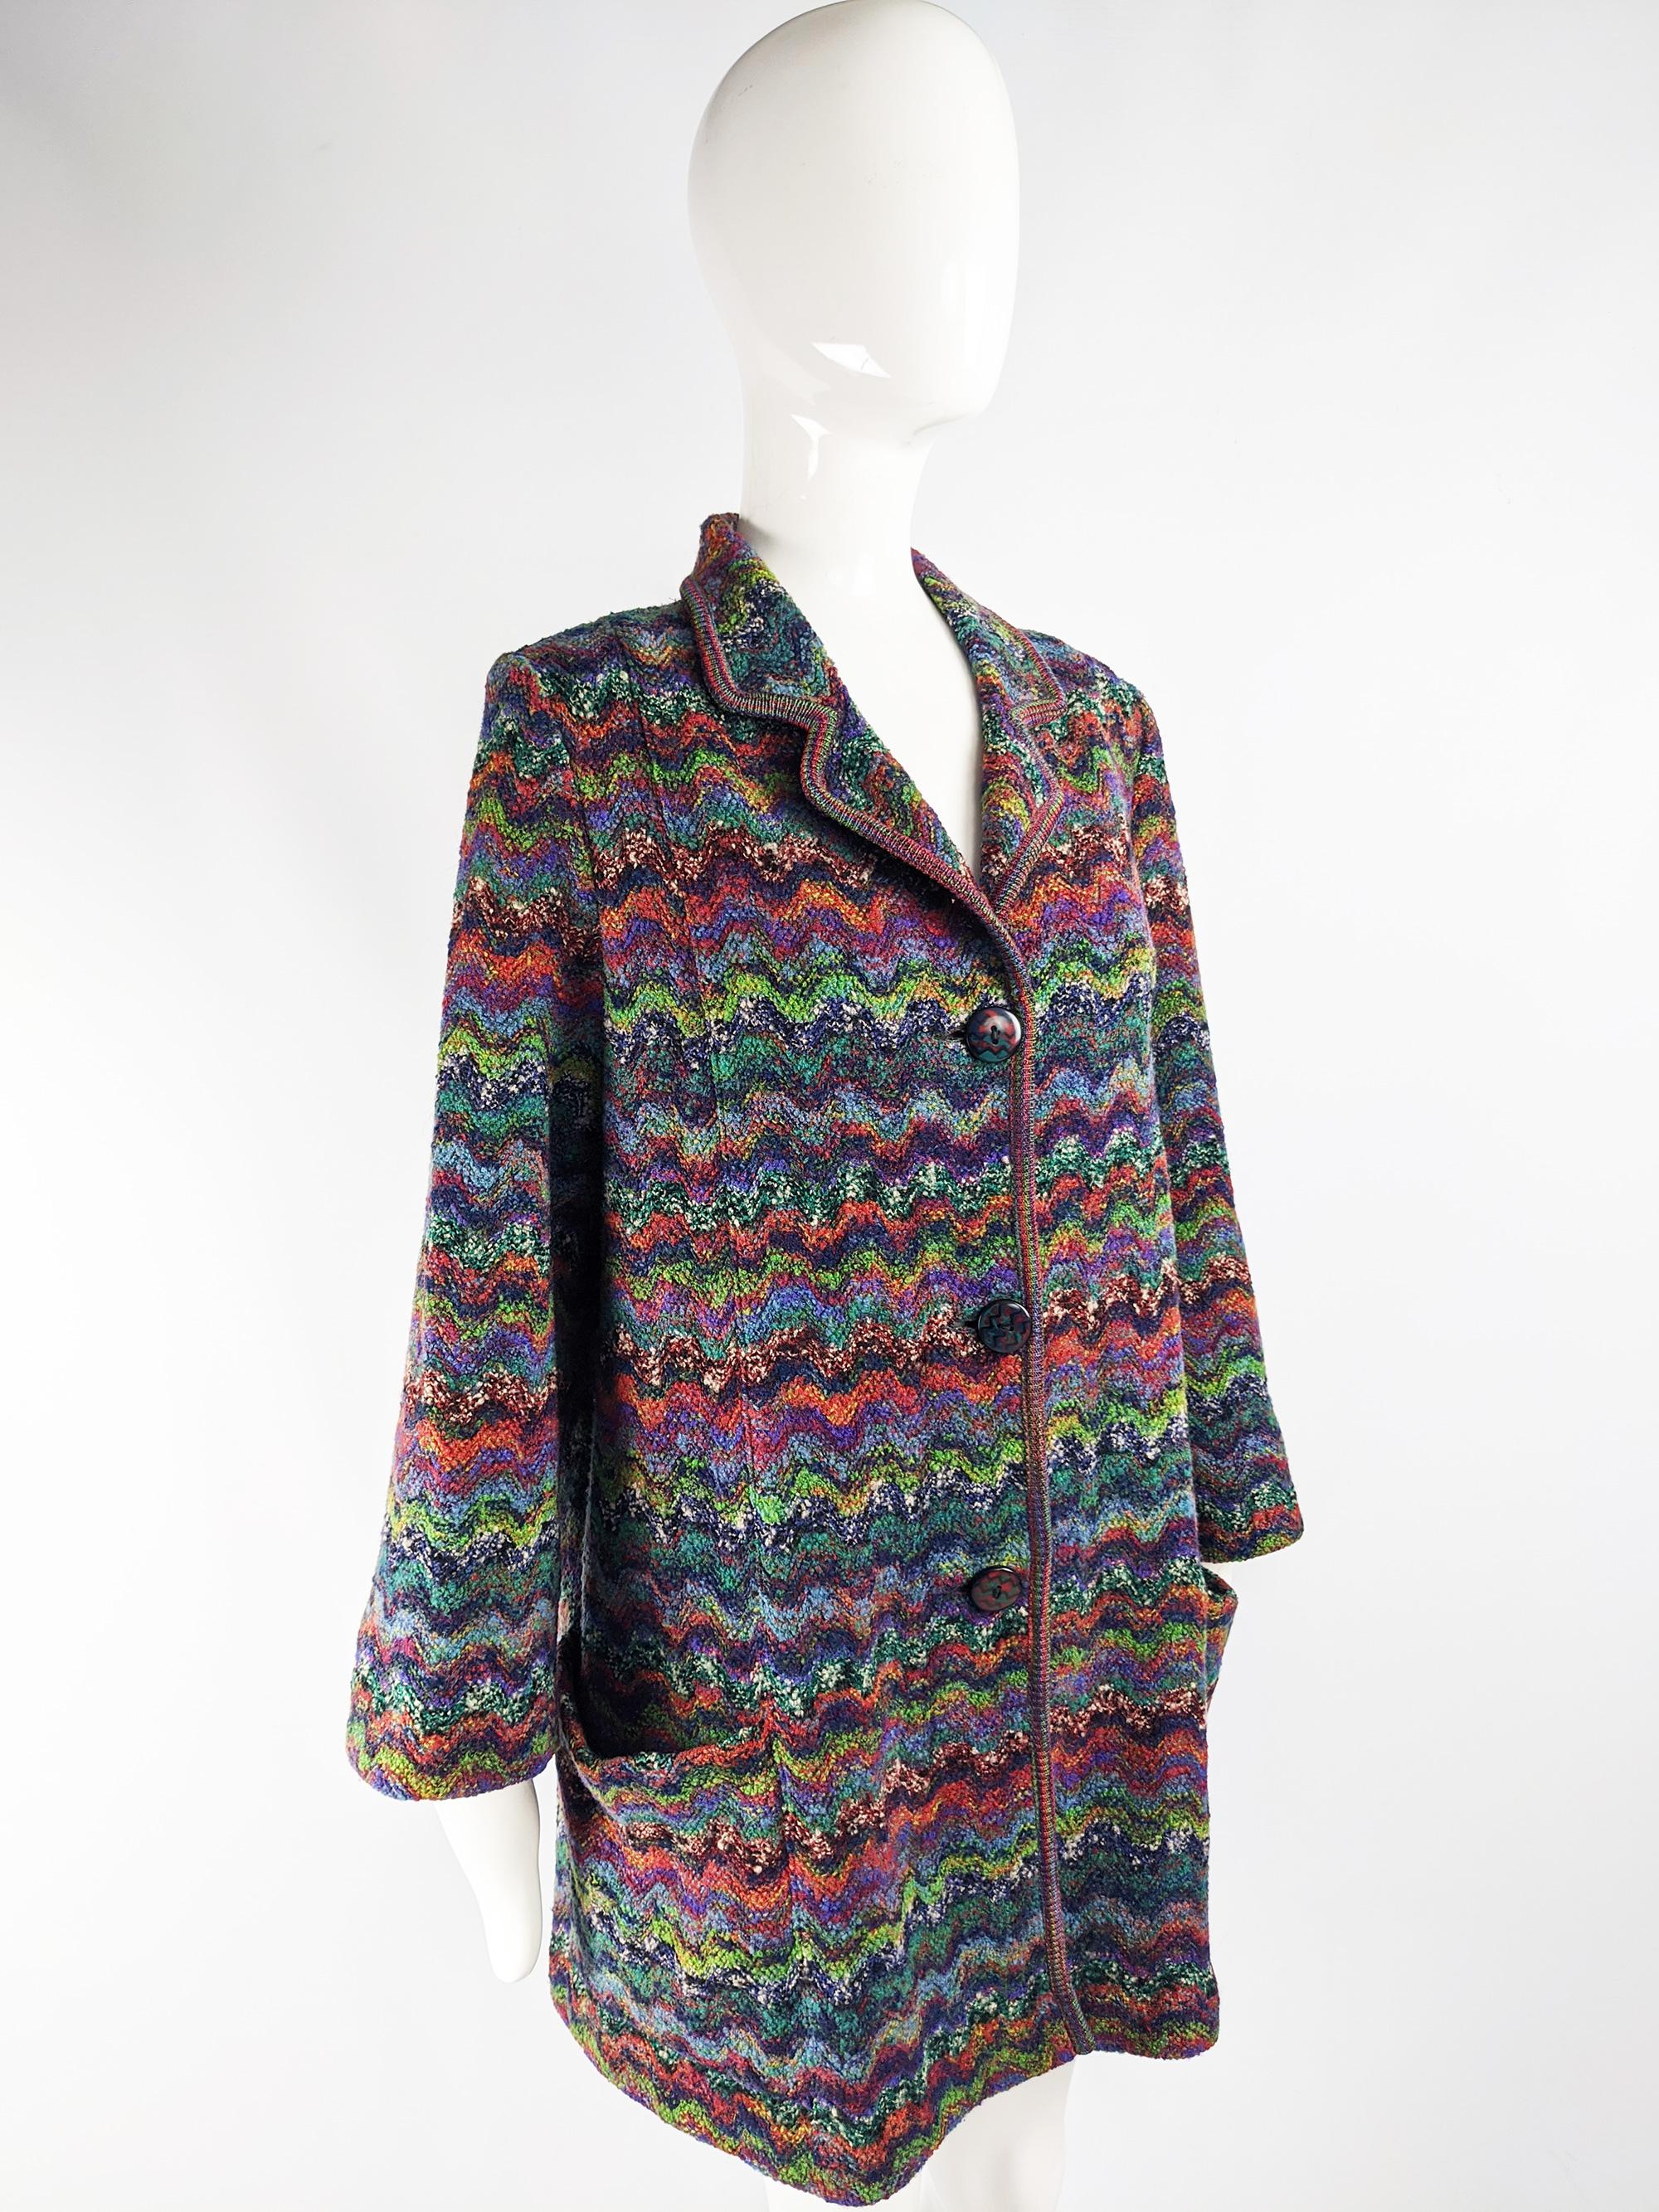 Missoni Vintage Zig Zag Wool Knit Coat, 1980s In Excellent Condition For Sale In Doncaster, South Yorkshire